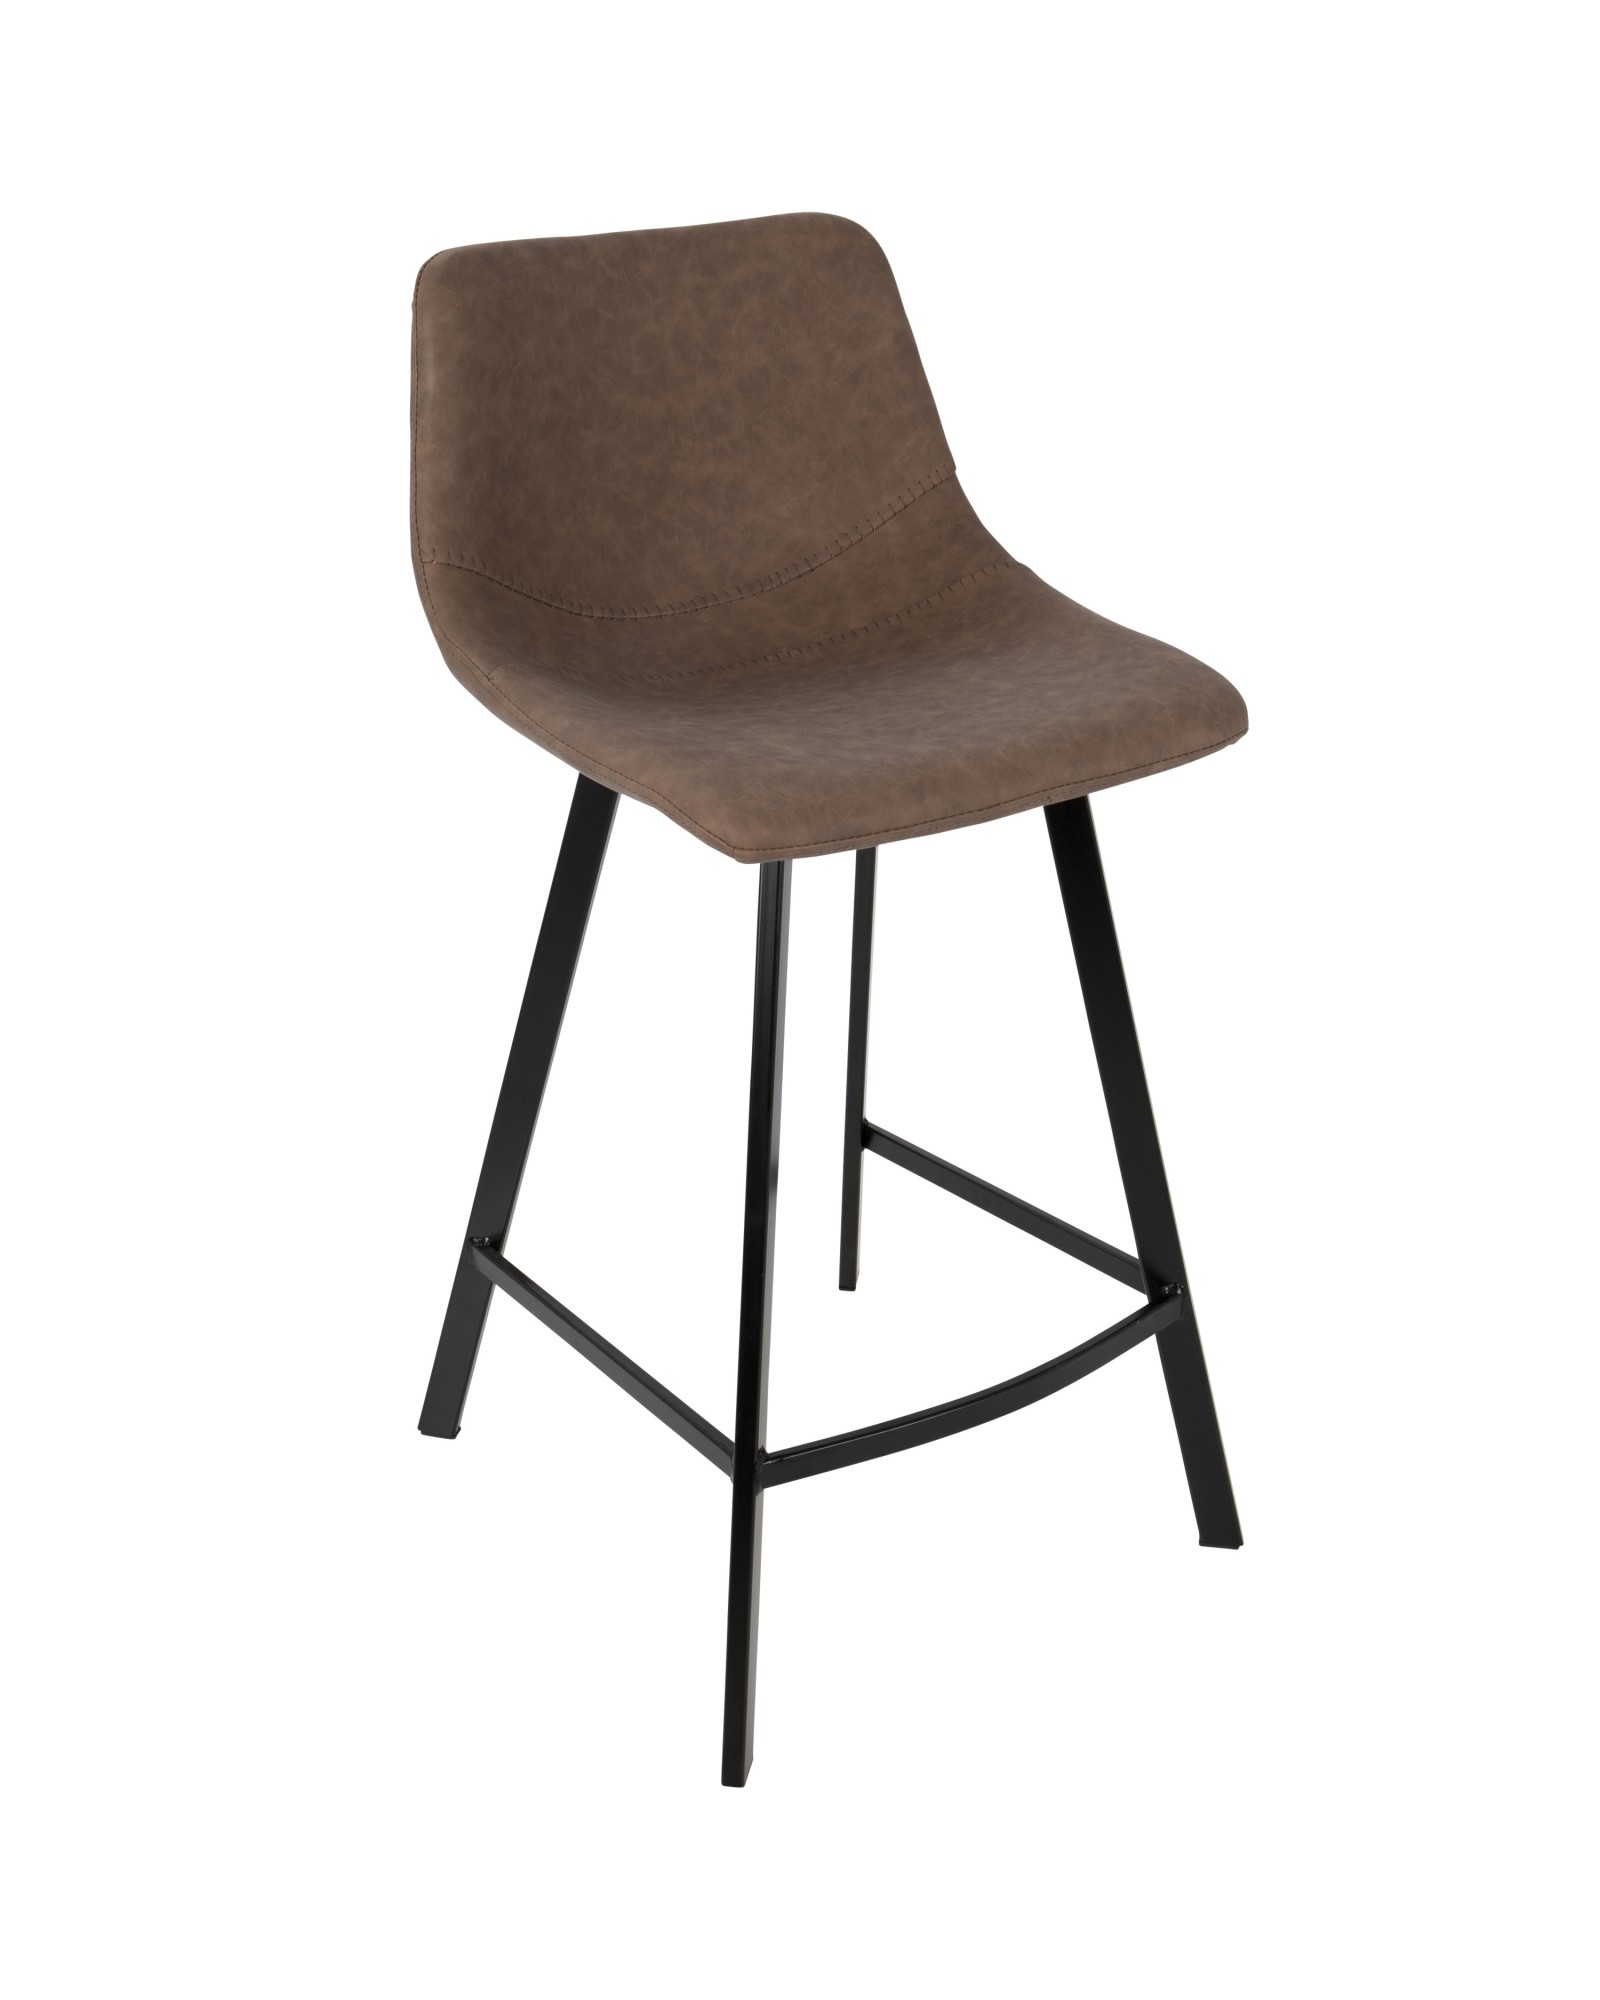 Outlaw Industrial Counter Stool in Black with Brown Faux Leather - Set of 2